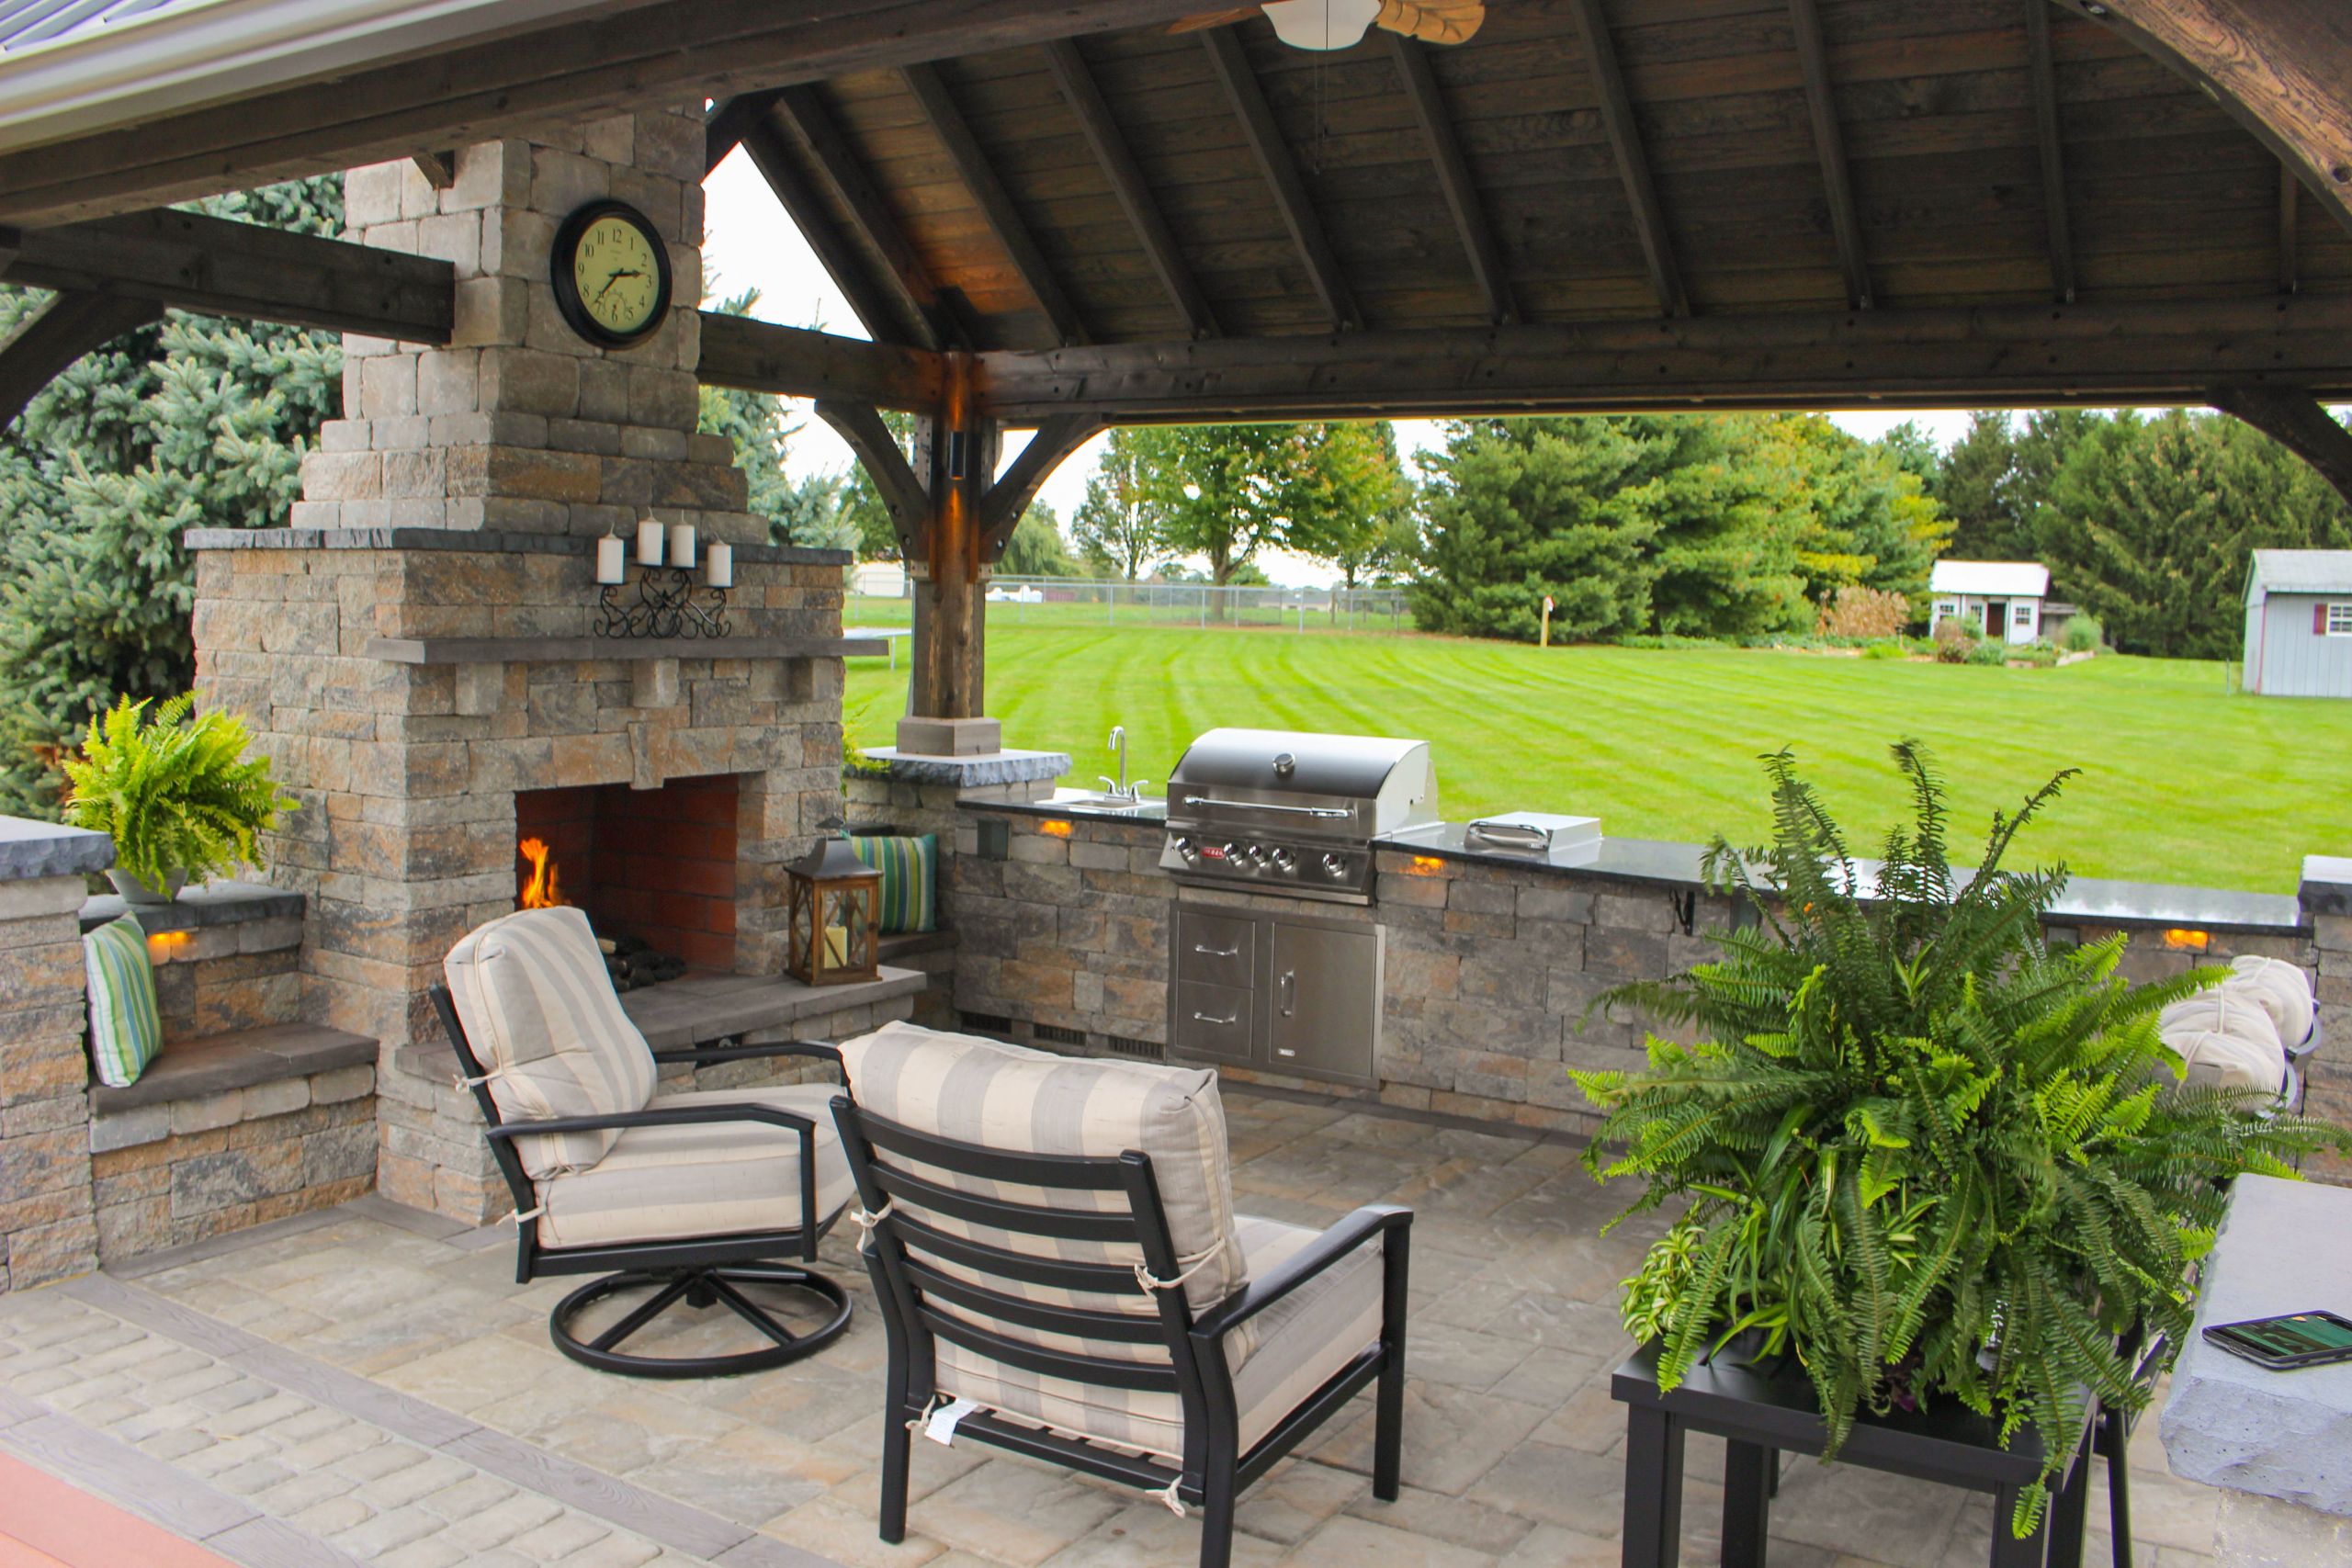 Outdoor Kitchen Patio Designs
 Outdoor Patio with Pavilion